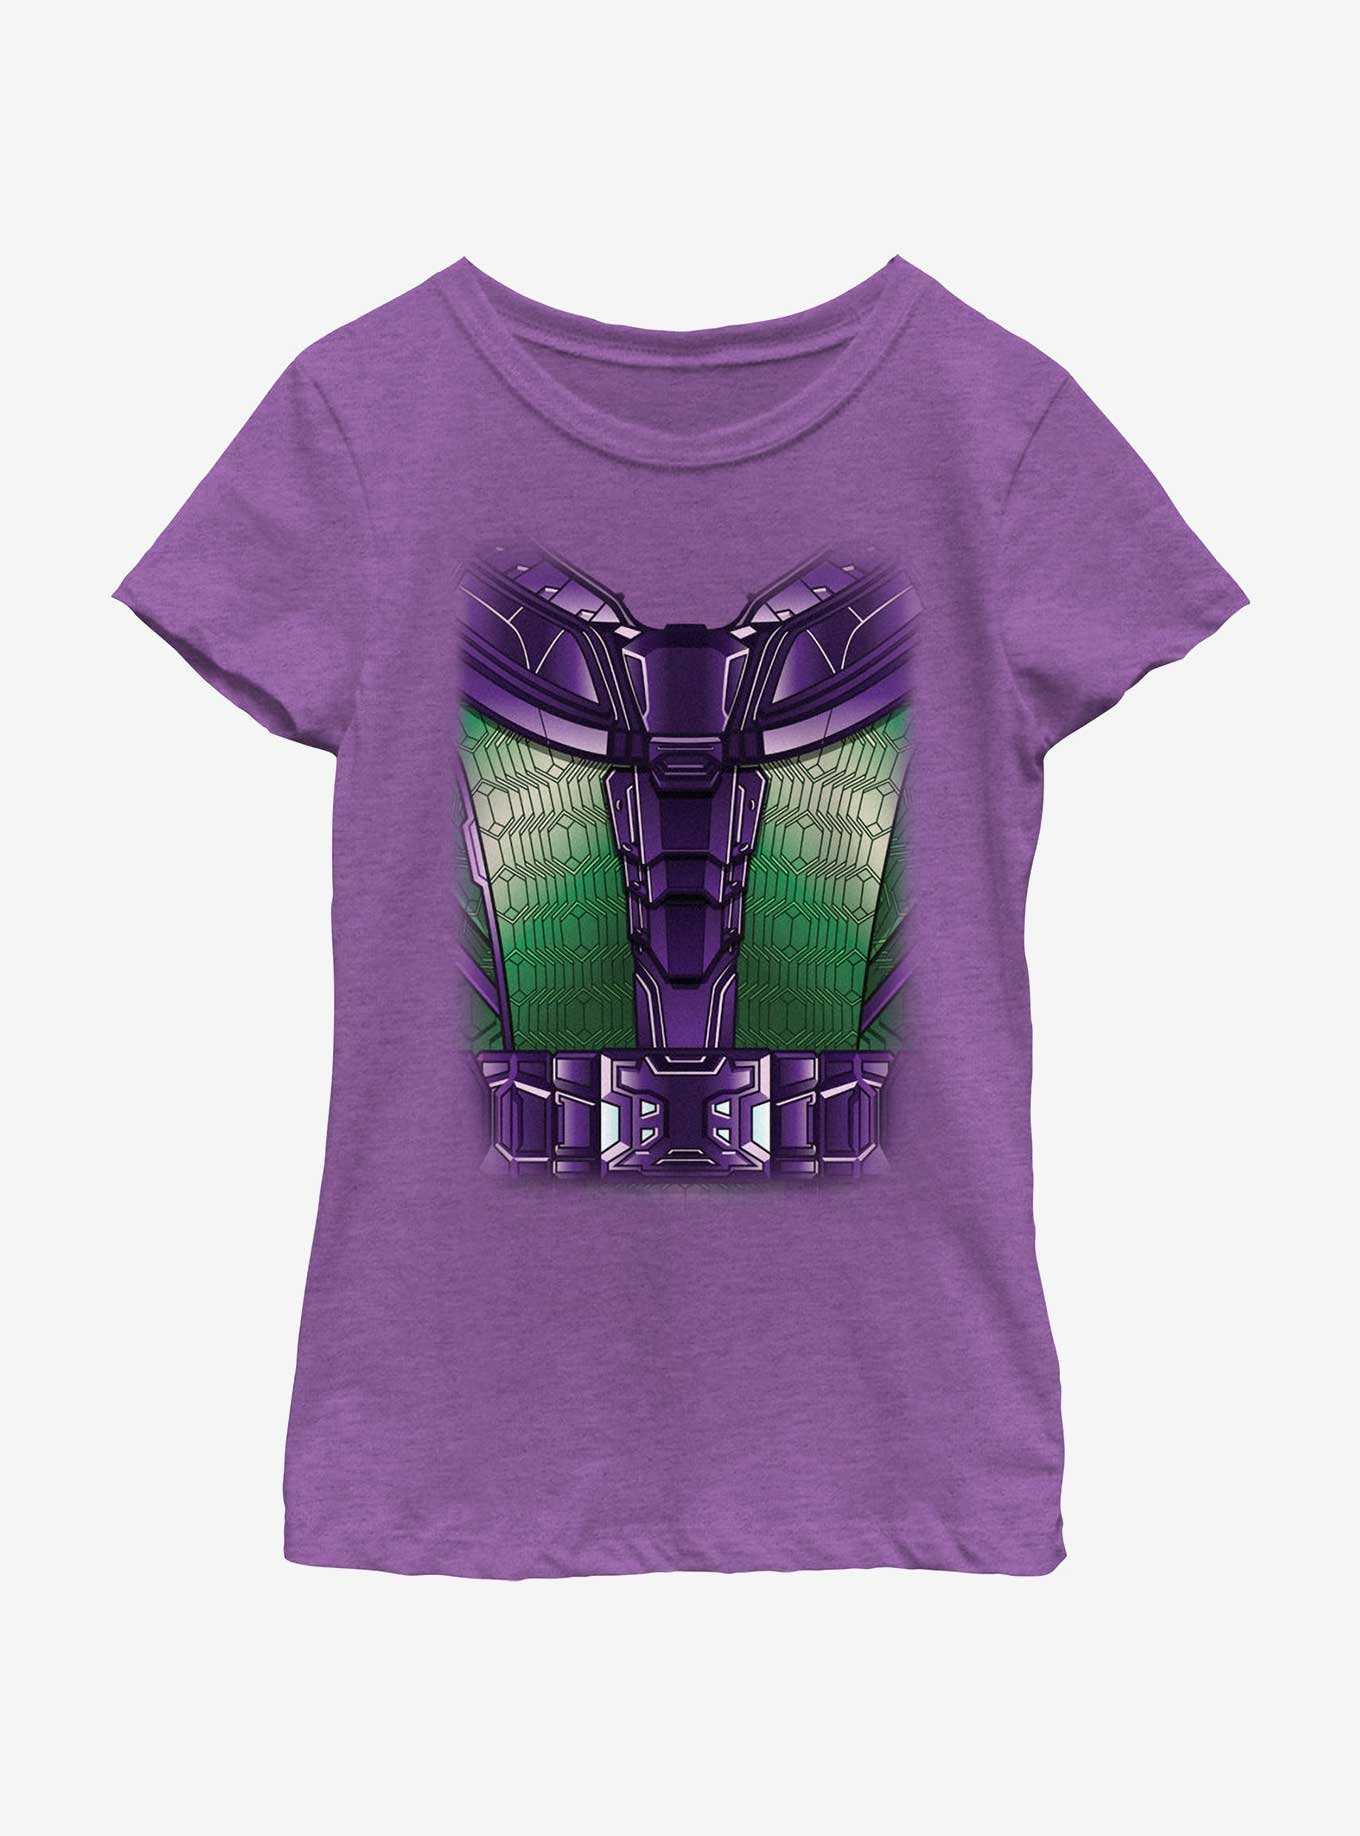 Marvel Ant-Man and the Wasp: Quantumania Kang Costume Youth Girls T-Shirt, , hi-res